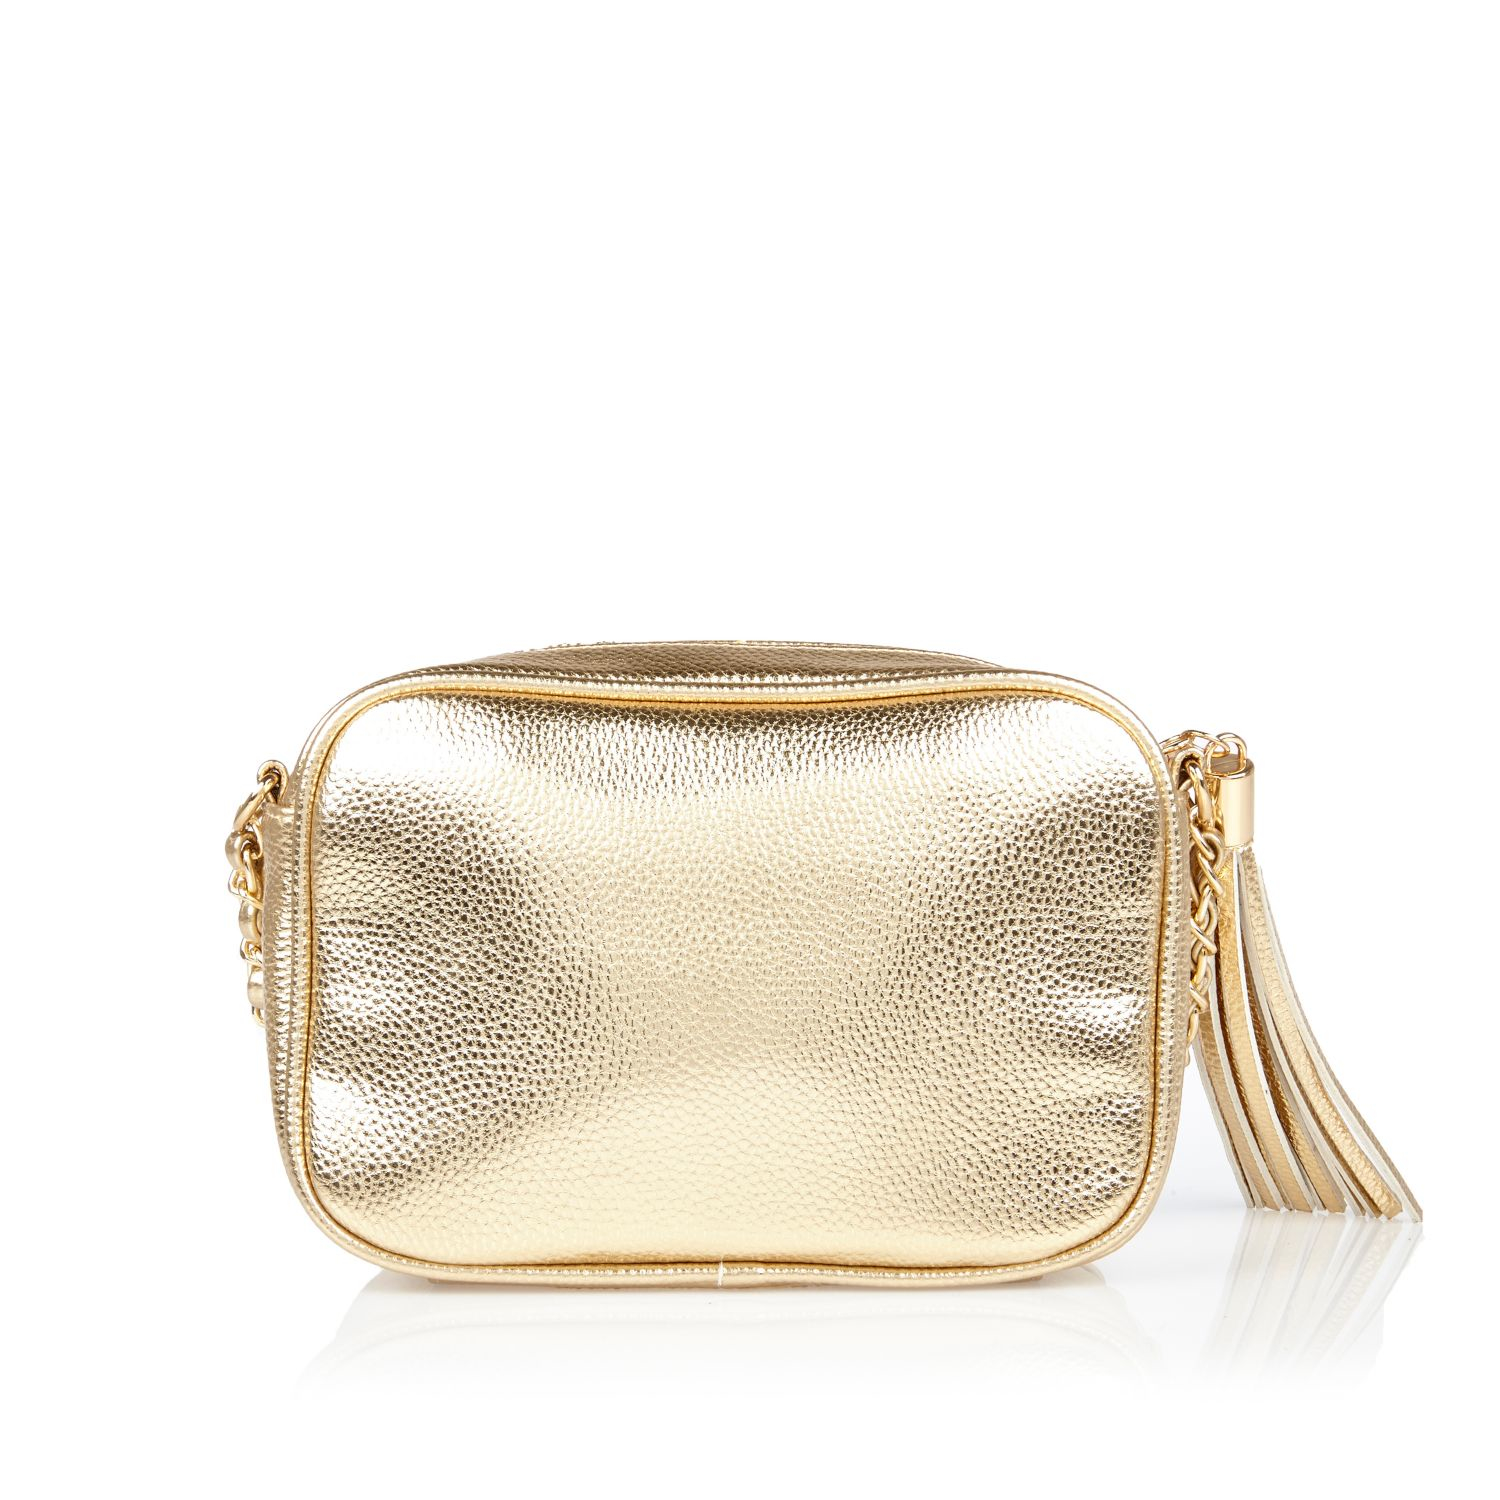 River Island Gold Metallic Quilted Cross Body Bag in Yellow - Lyst